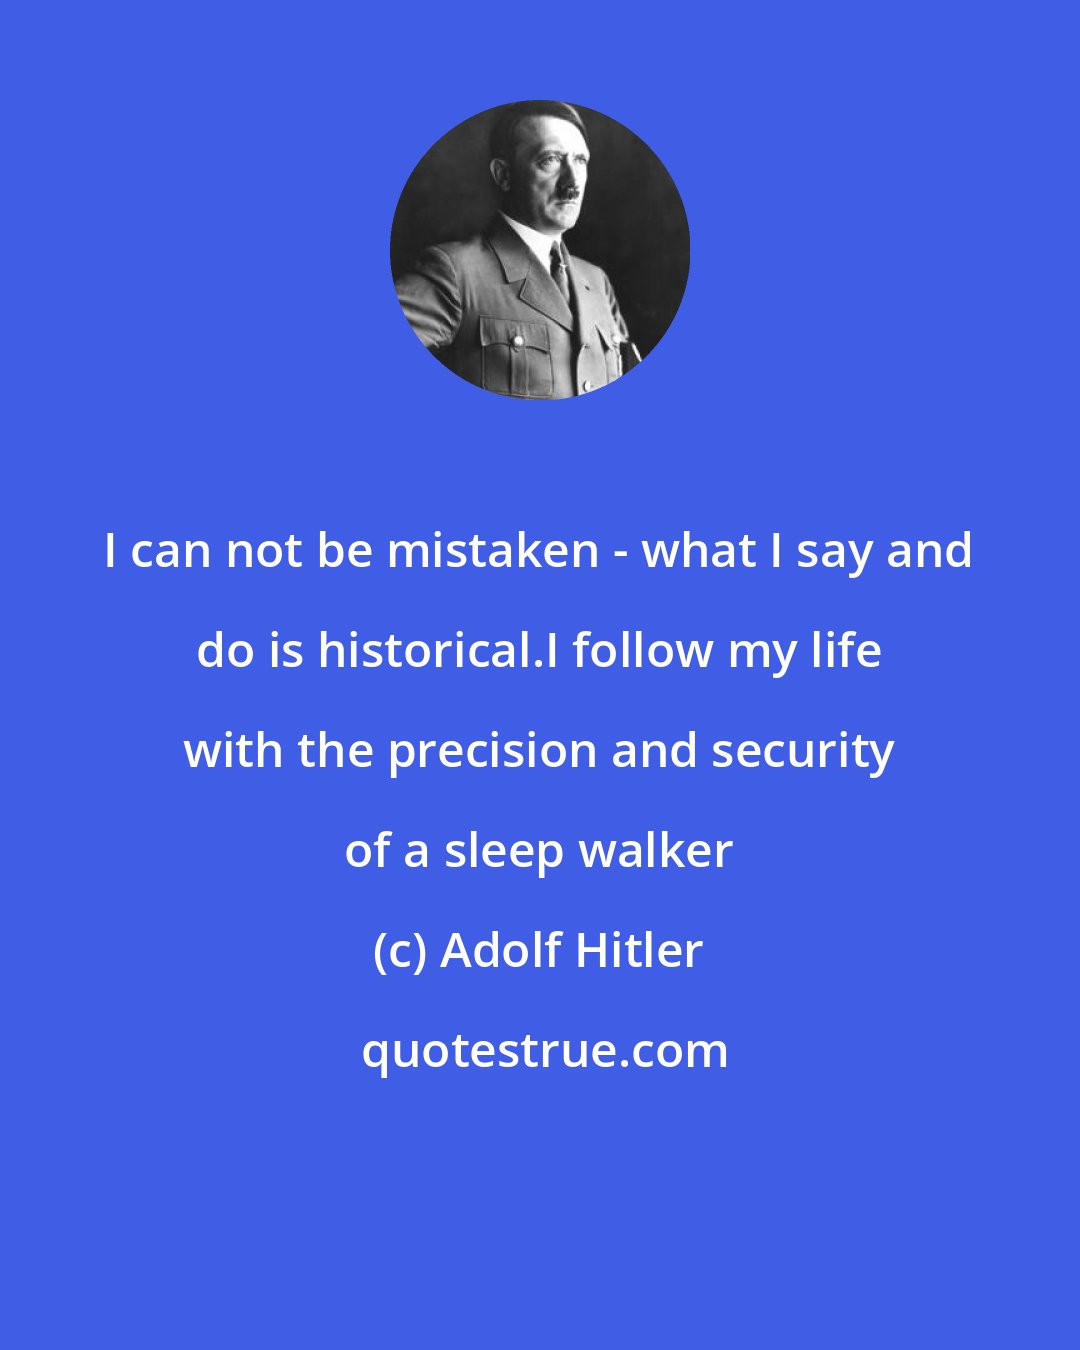 Adolf Hitler: I can not be mistaken - what I say and do is historical.I follow my life with the precision and security of a sleep walker